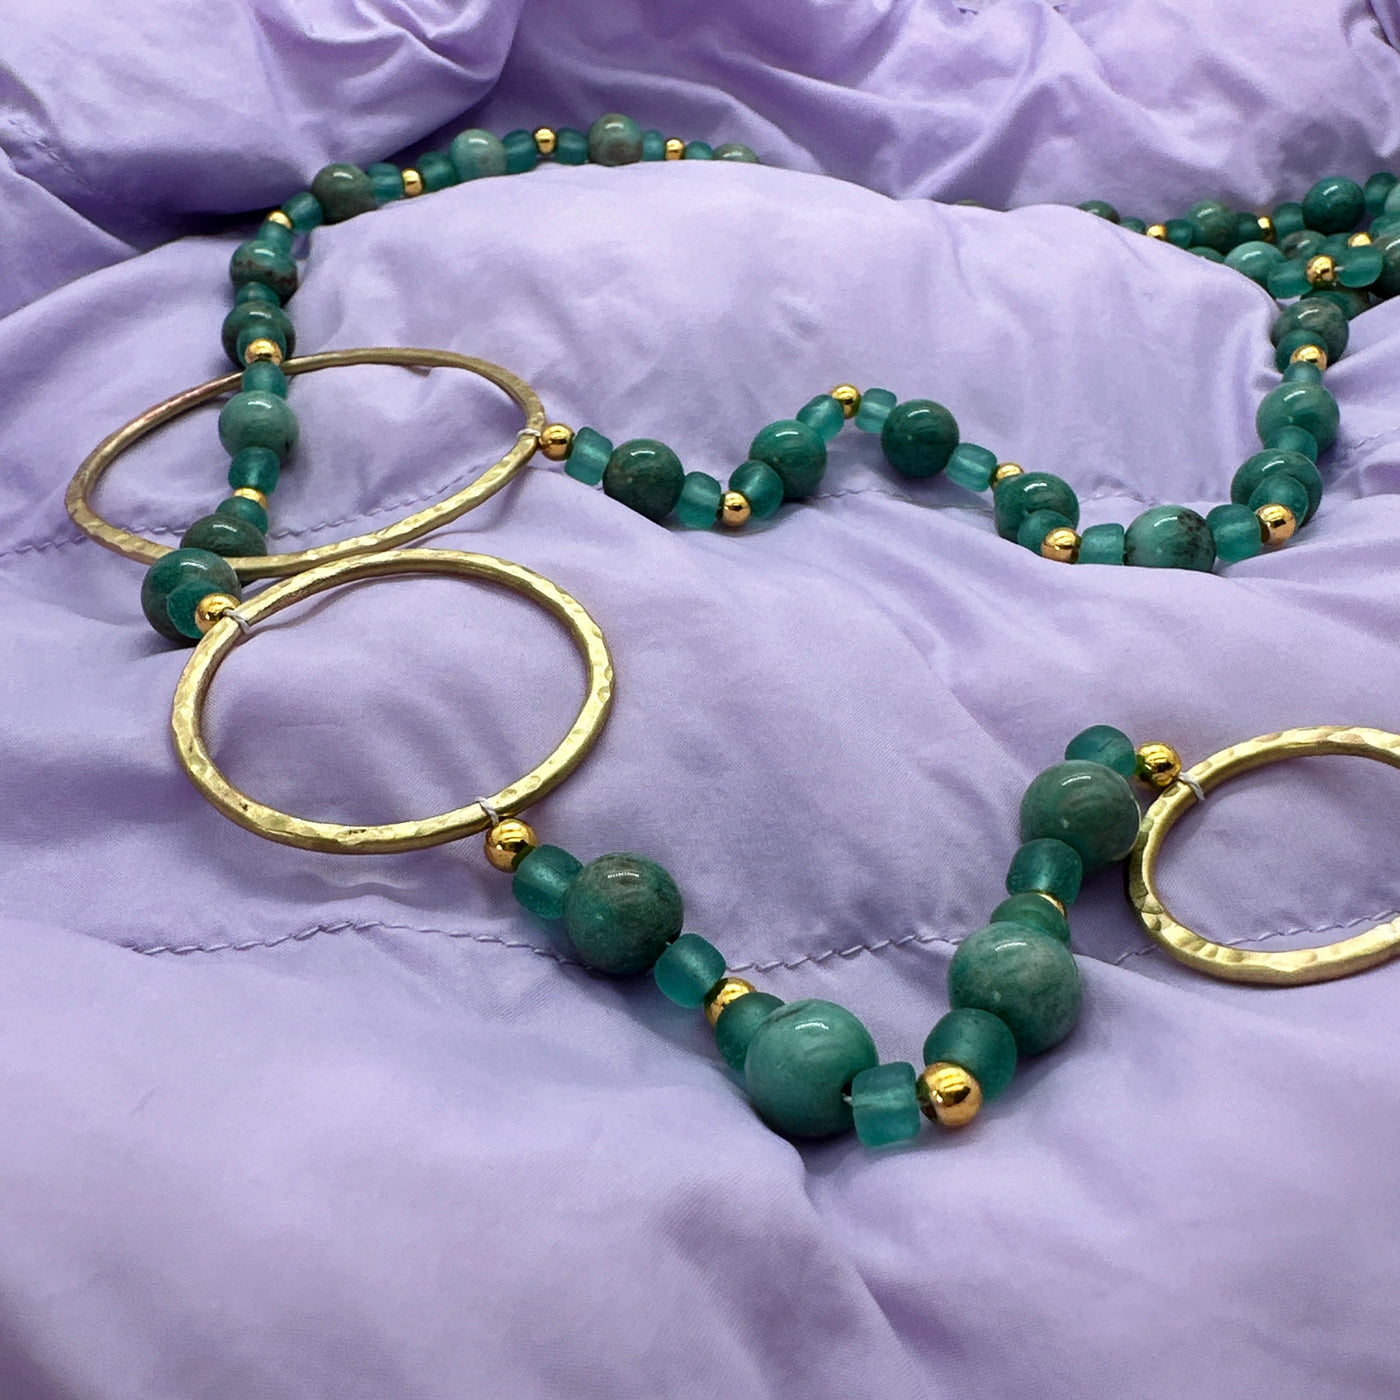 Scarf necklace with brass circles, sea foam verdite and green glass beads